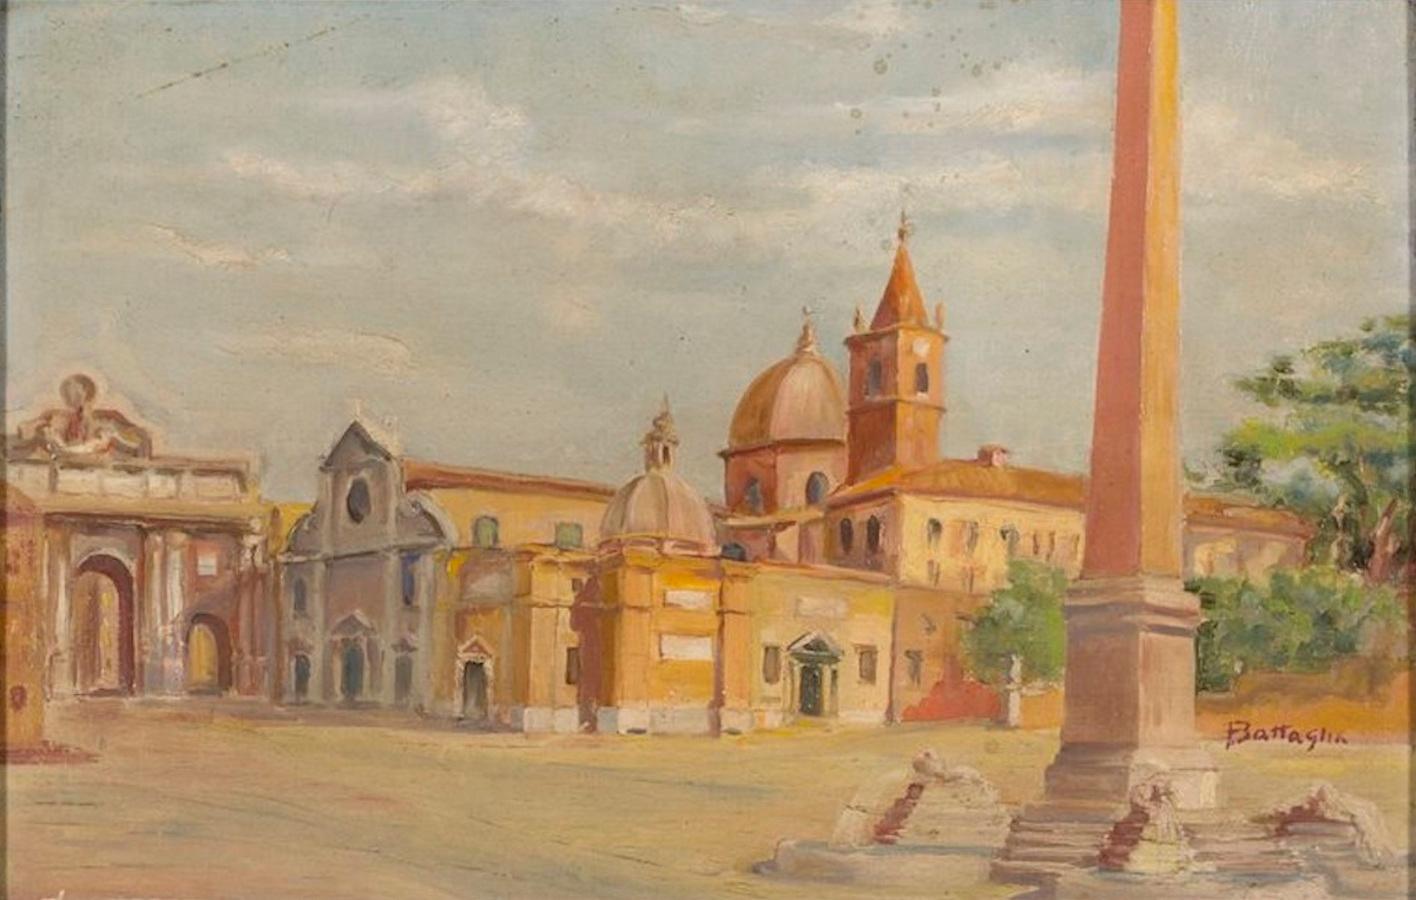 Piazza del Popolo, Rome - Oil on Canvased Cardboard - Early 20th Century - Painting by Alessandro Battaglia